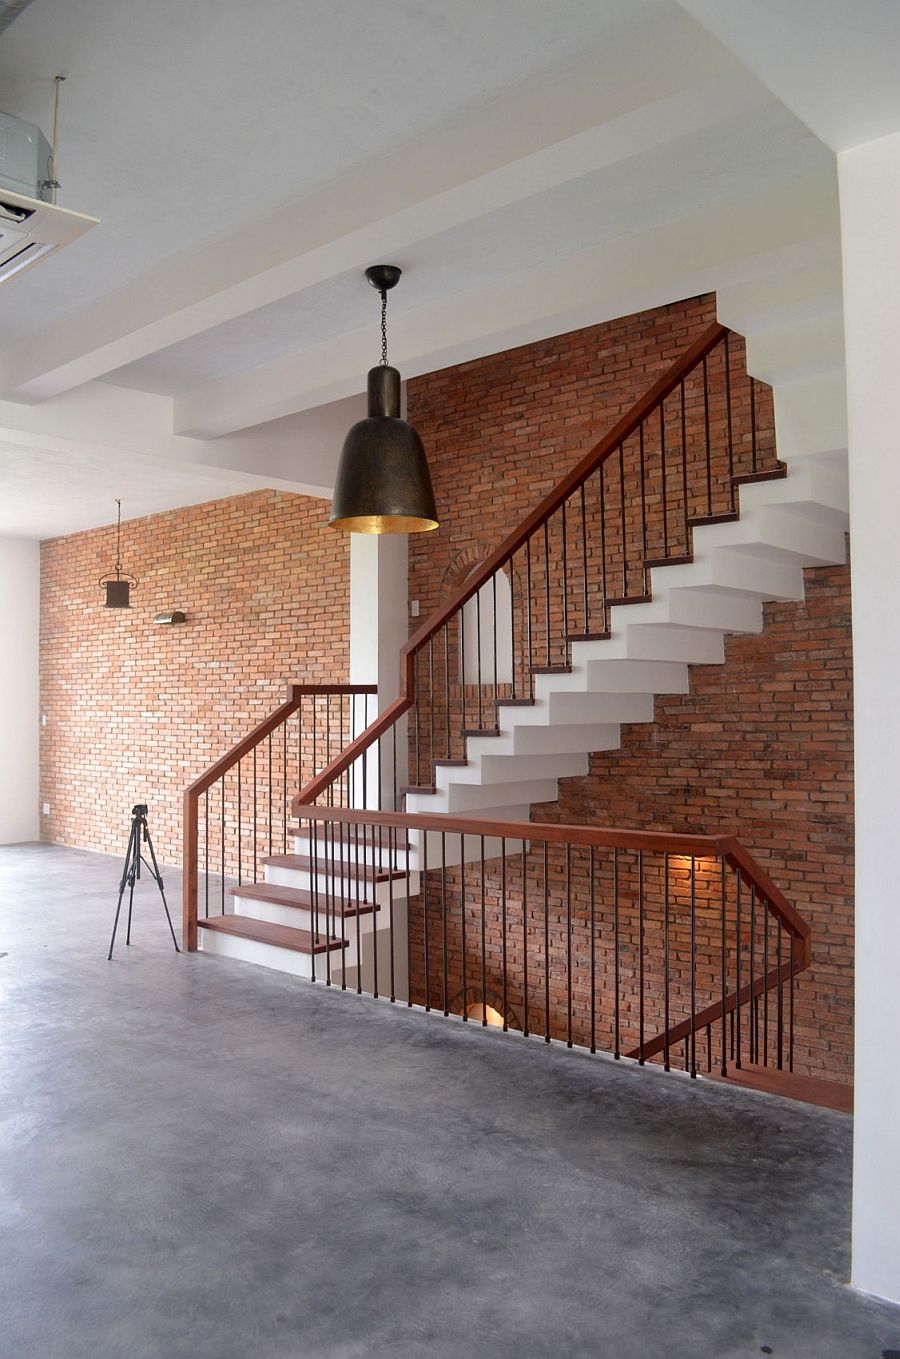 Brick draped staircase wall adds character to the interior